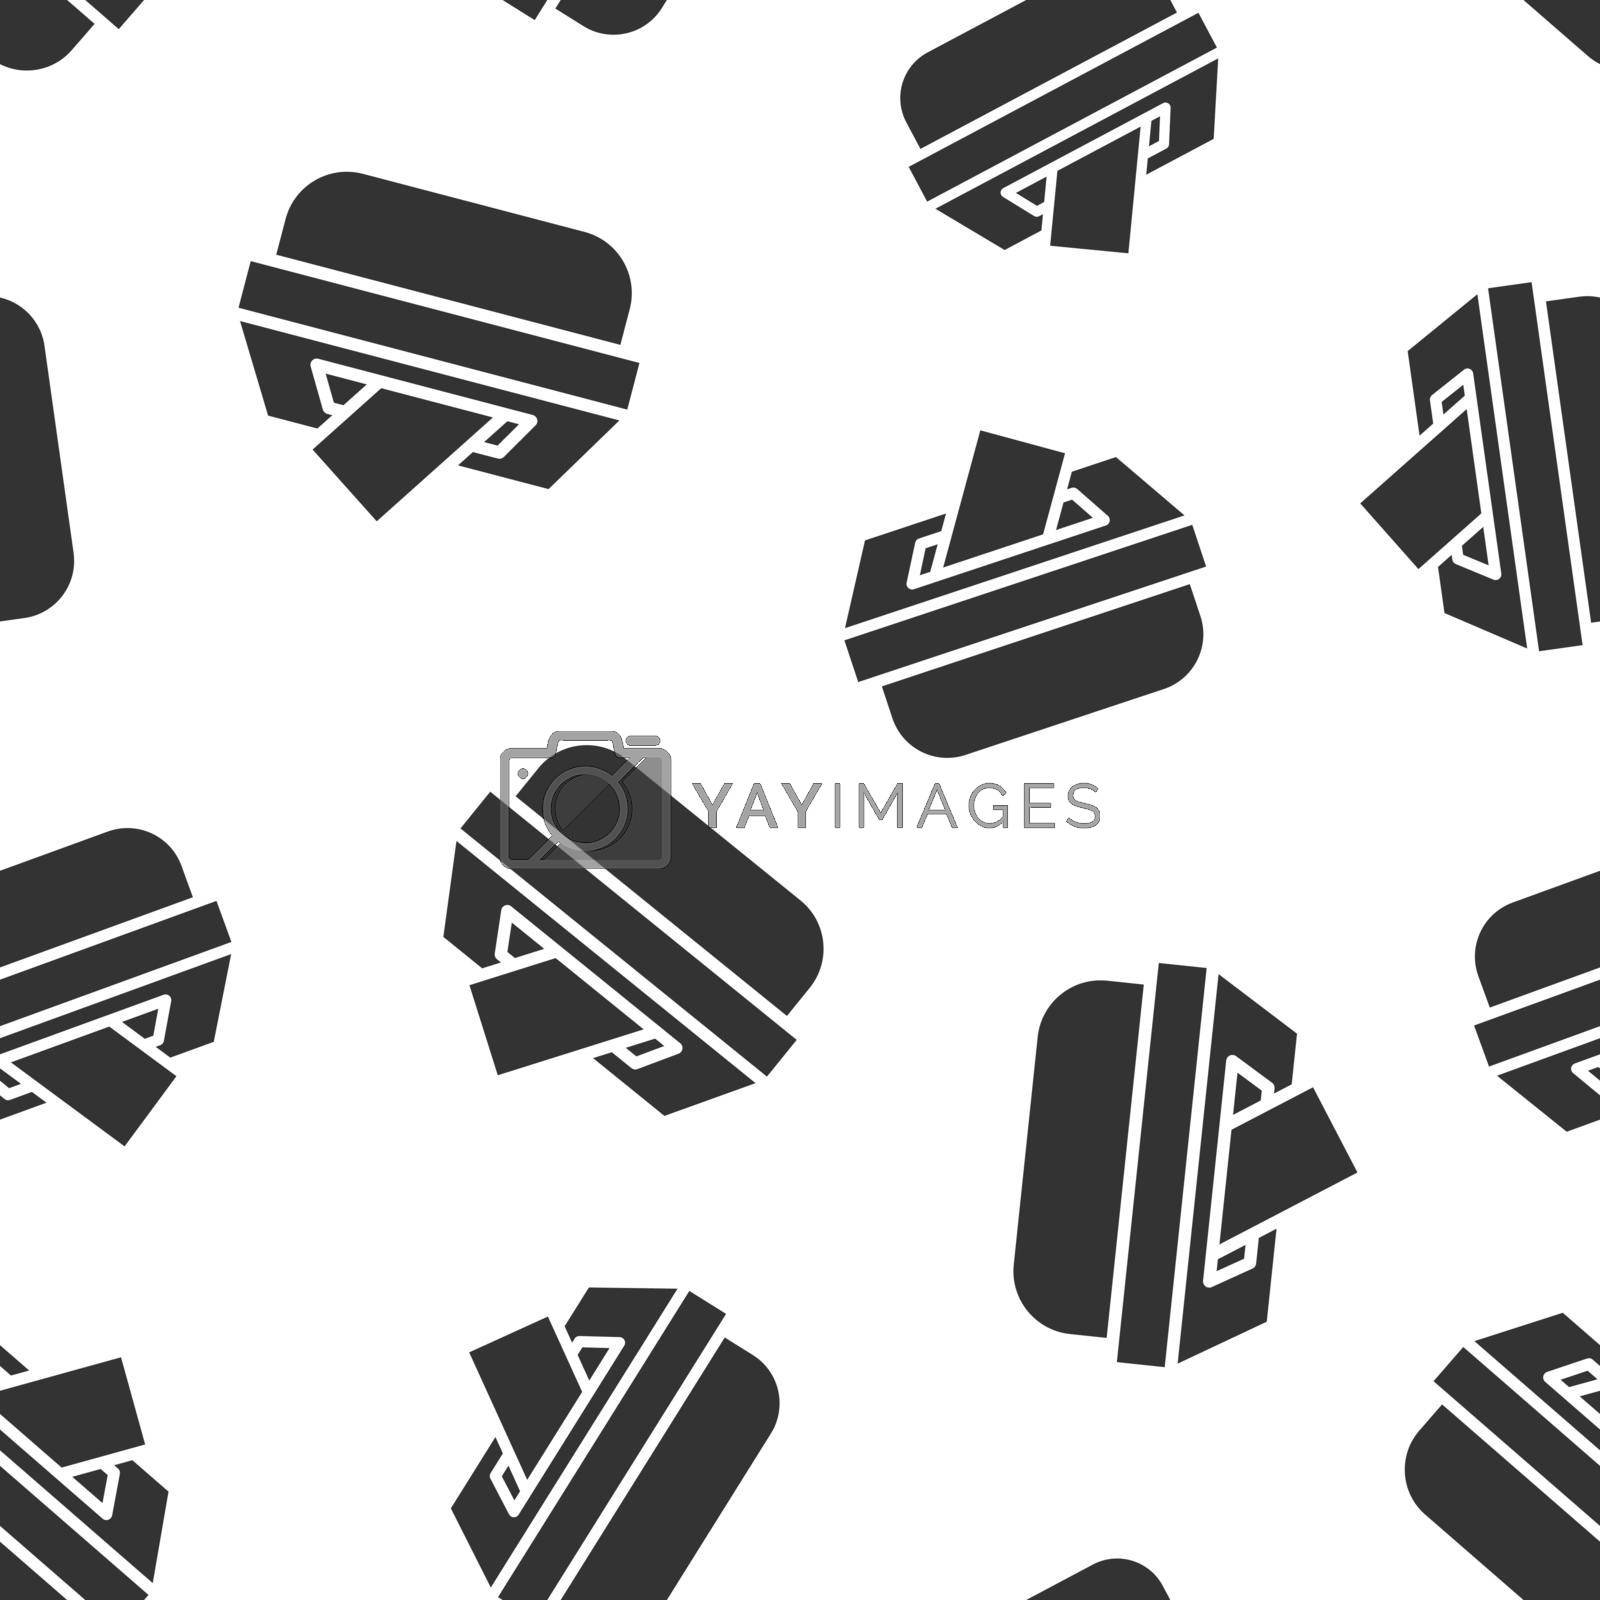 Royalty free image of Election voter box icon seamless pattern background. Ballot suggestion vector illustration. Election vote symbol pattern. by LysenkoA